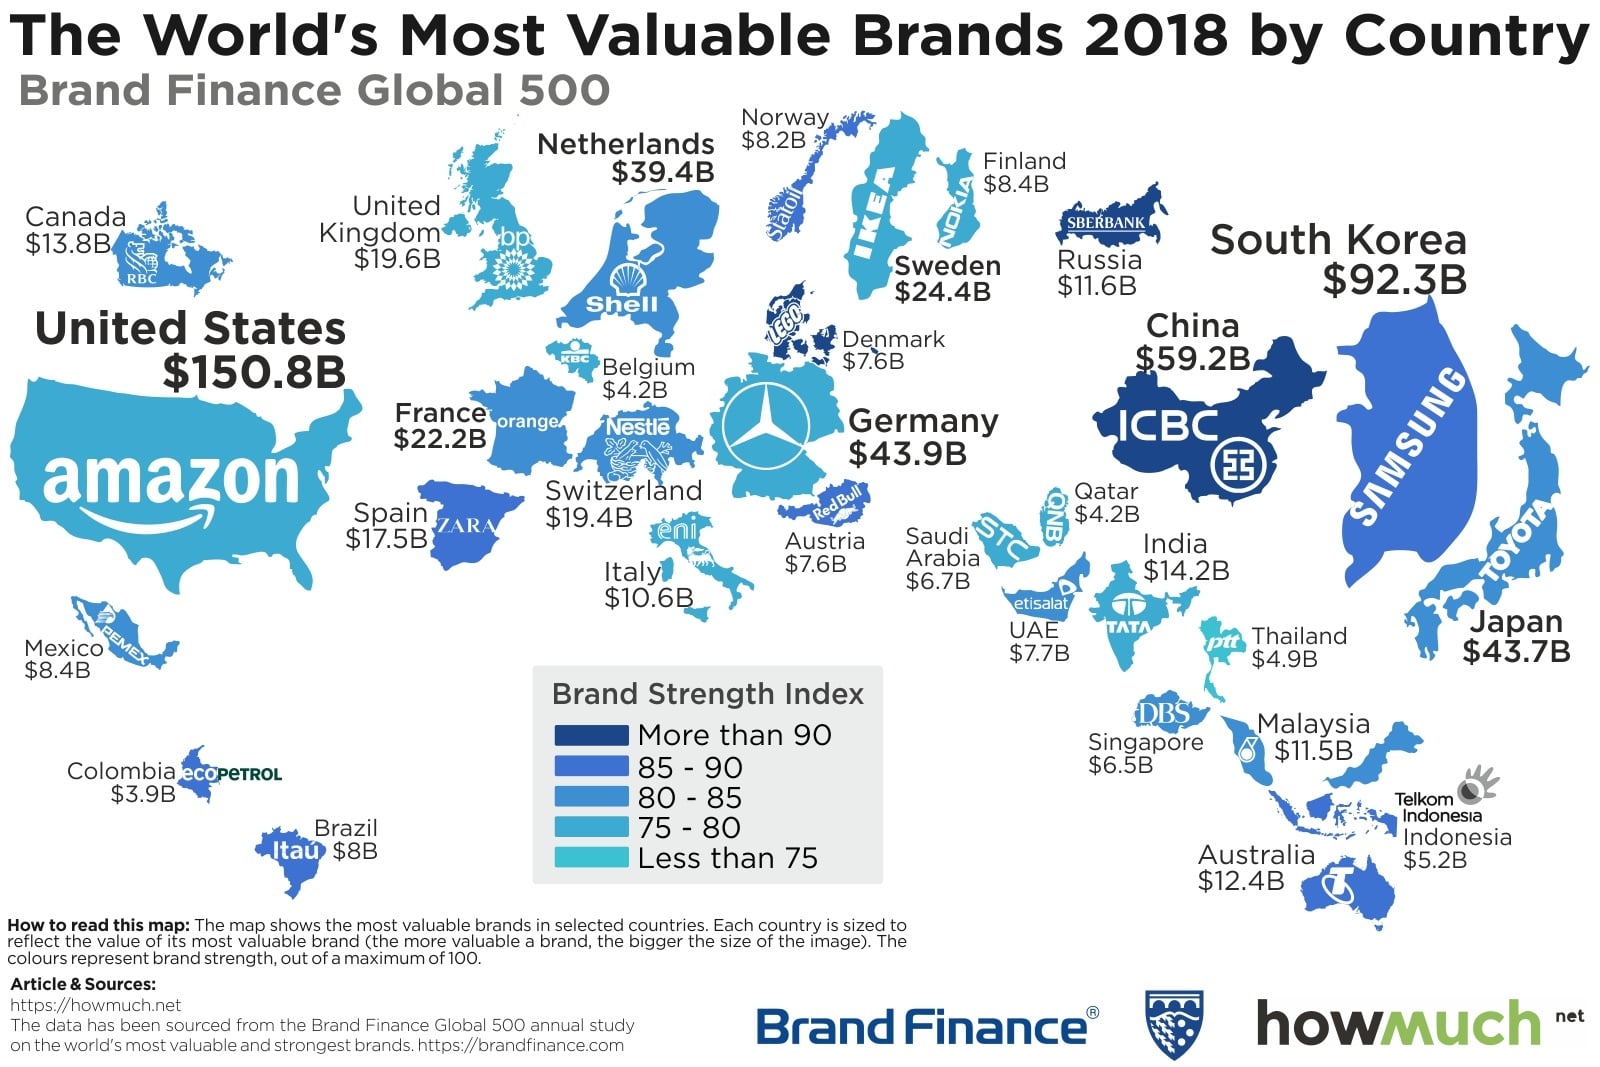 World's Most Valuable Brands In 2018